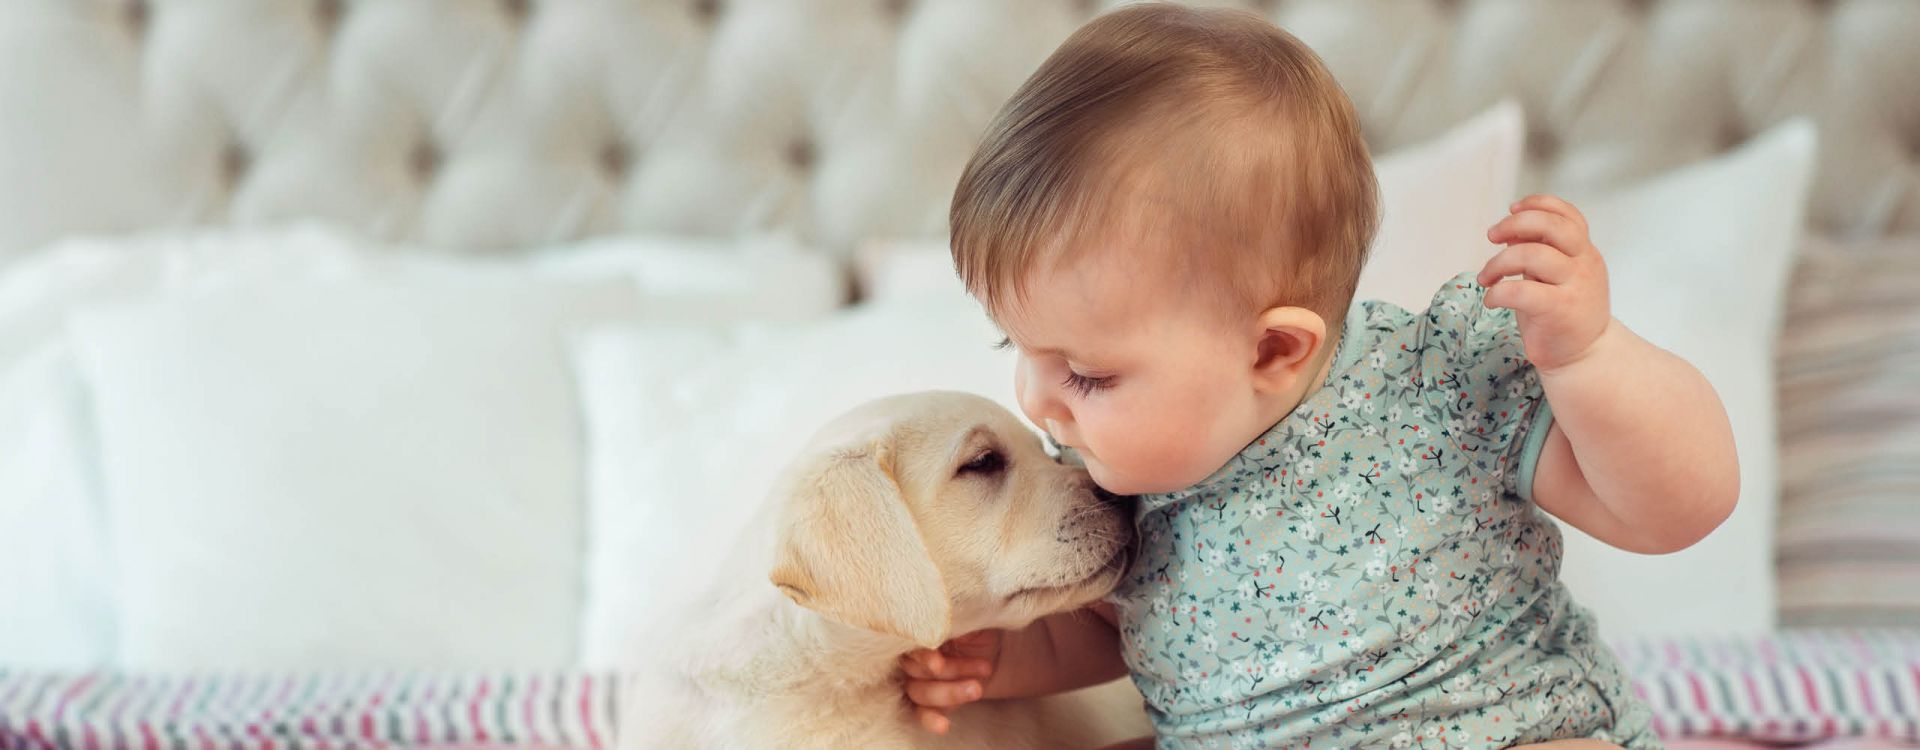 How to Introduce Dog to Baby: Ensuring Safety & Harmony Article Image